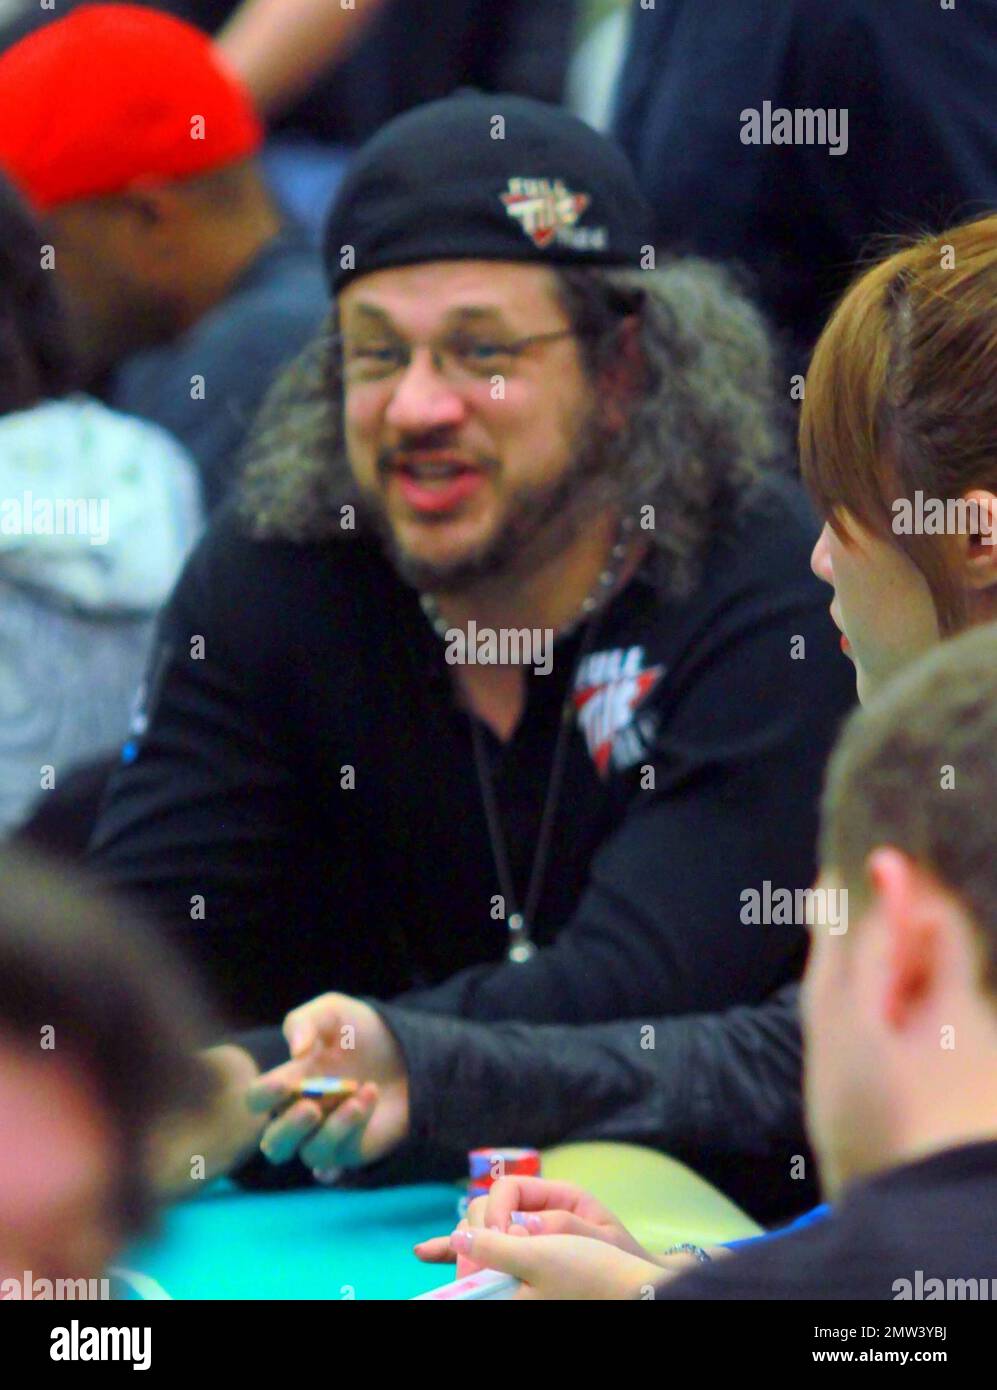 Joseph (Joe) D. Reitman plays at the 8th Annual World Poker Tour Invitational Texas Hold 'Em poker tournament for the Chrysalis Charity, a non-profit organization dedicated to helping homeless and economically disadvantaged individuals become self-sufficient through employment opportunities, at the Commerce Casino, in Los Angeles, California, 02/20/10. Stock Photo